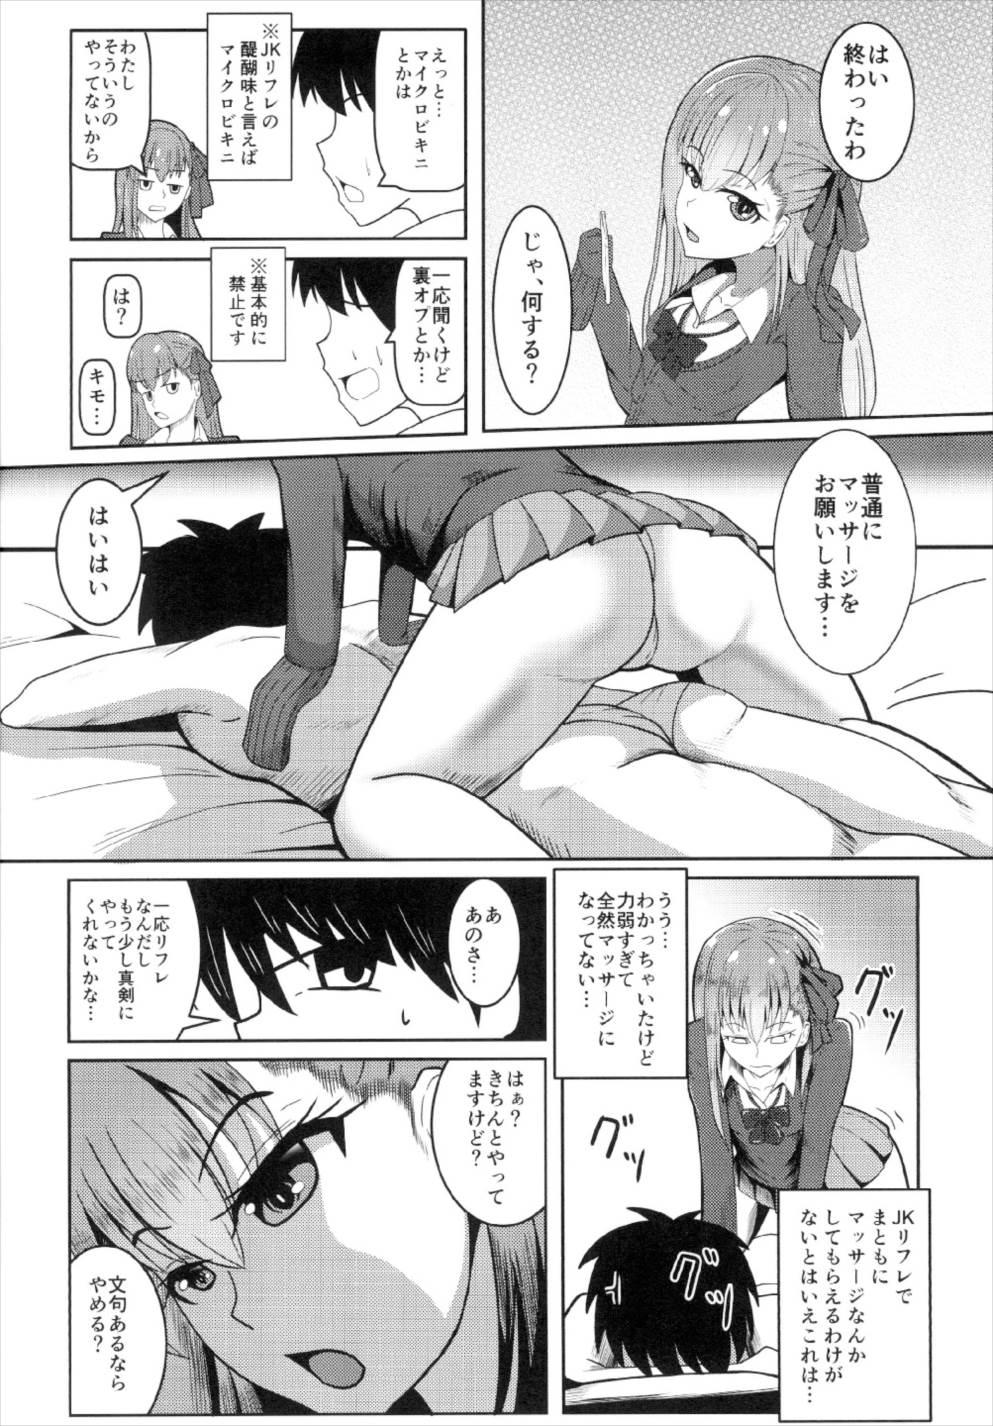 Hotwife Chaldea JK Collection Vol. 2 Meltlilith - Fate grand order Teen Sex - Page 4